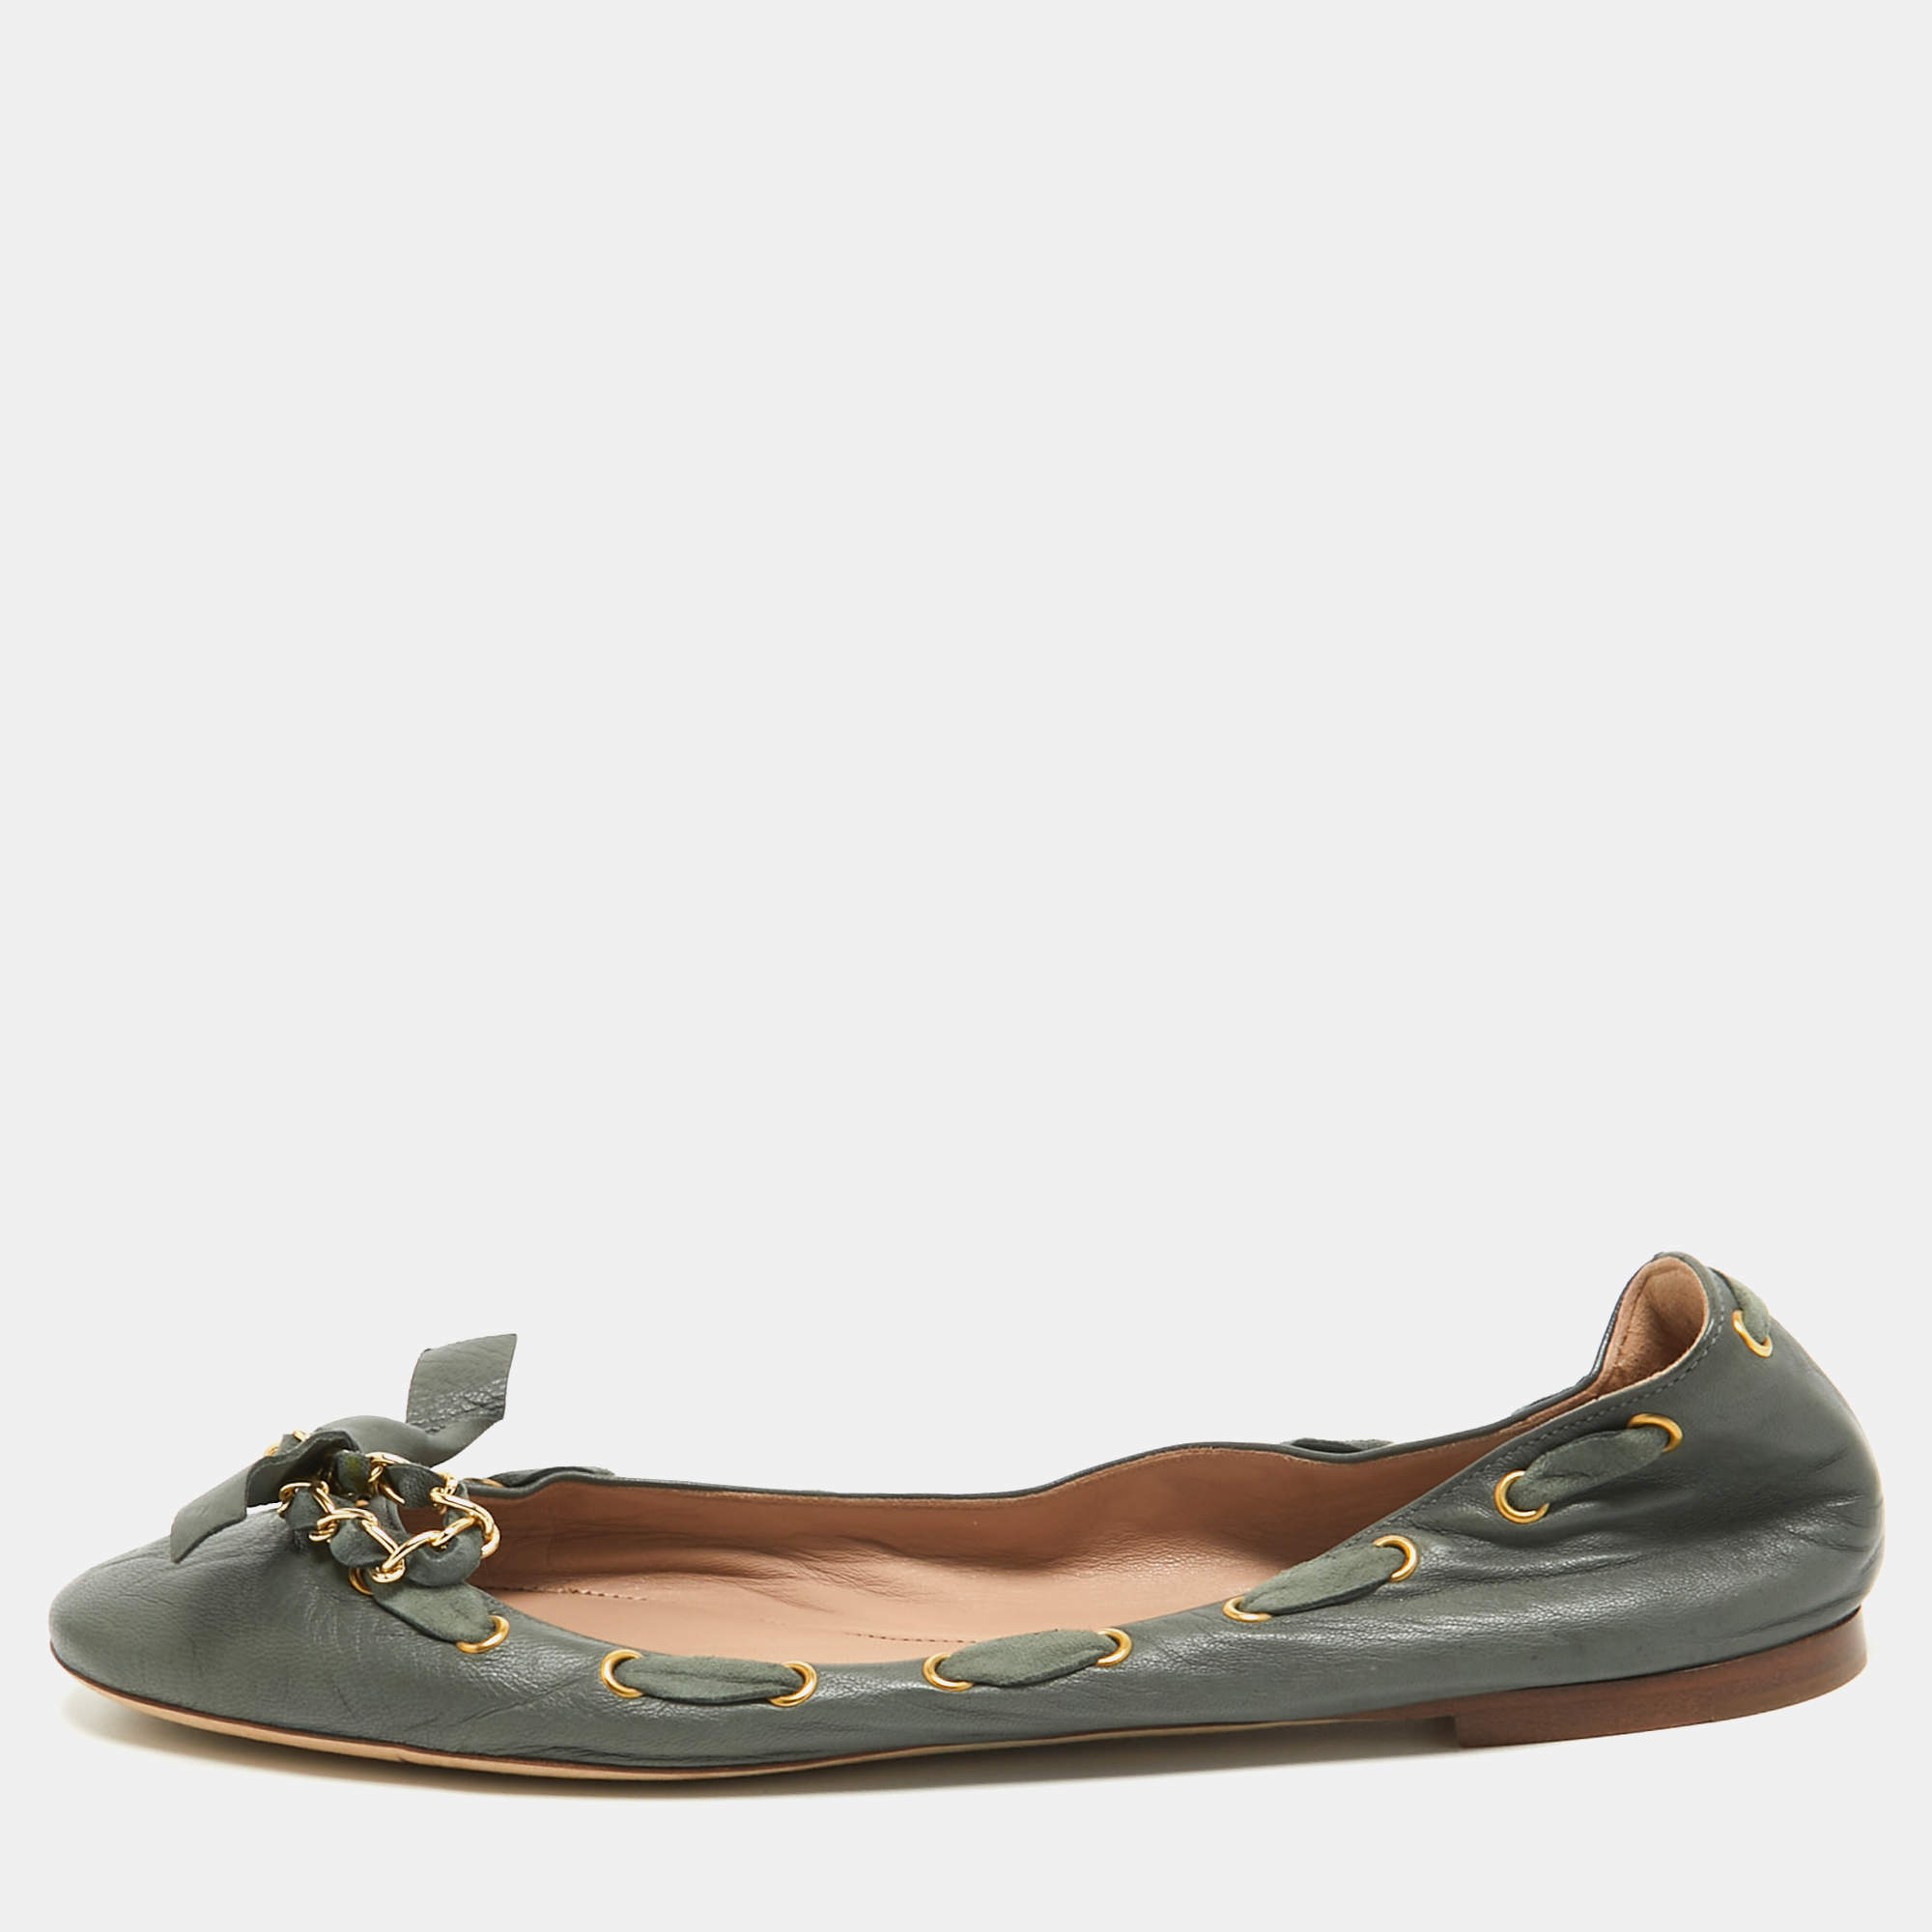 Chloe Grey Leather Knotted Chain Bow Ballet Flats Size 38 Chloe | The ...